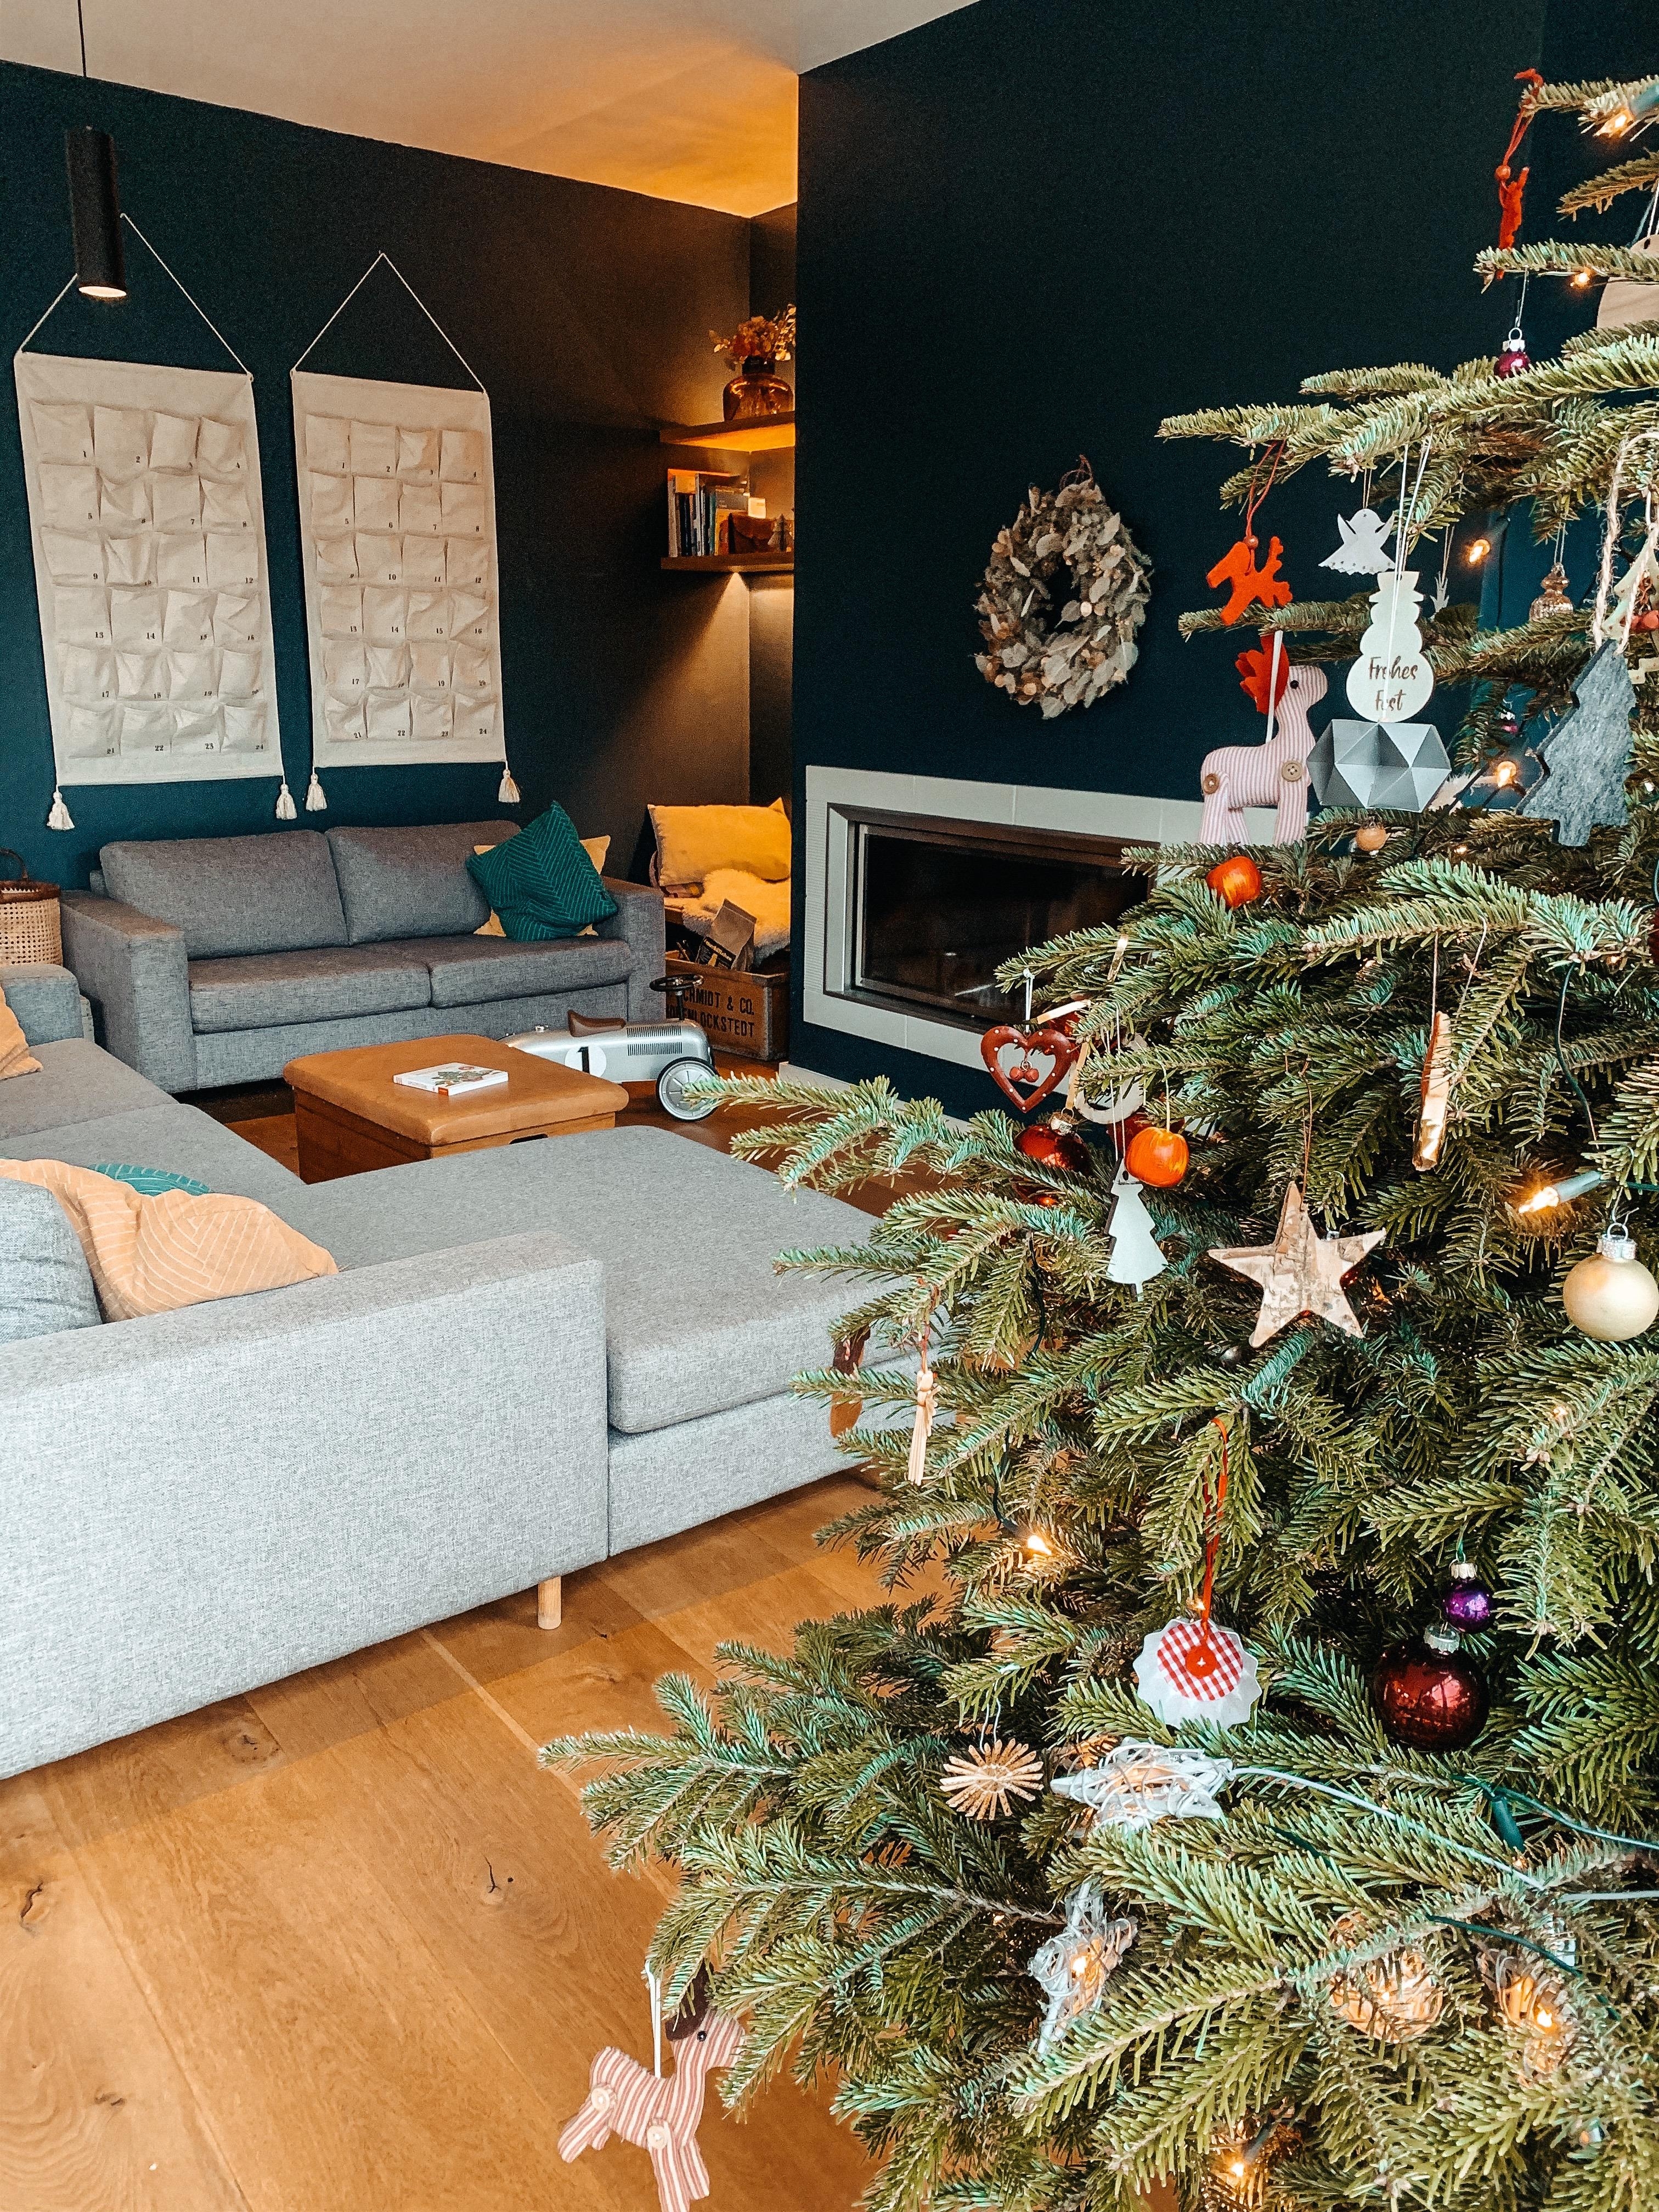 Christmas Setting 3 #wohnzimmer #couch #kamin